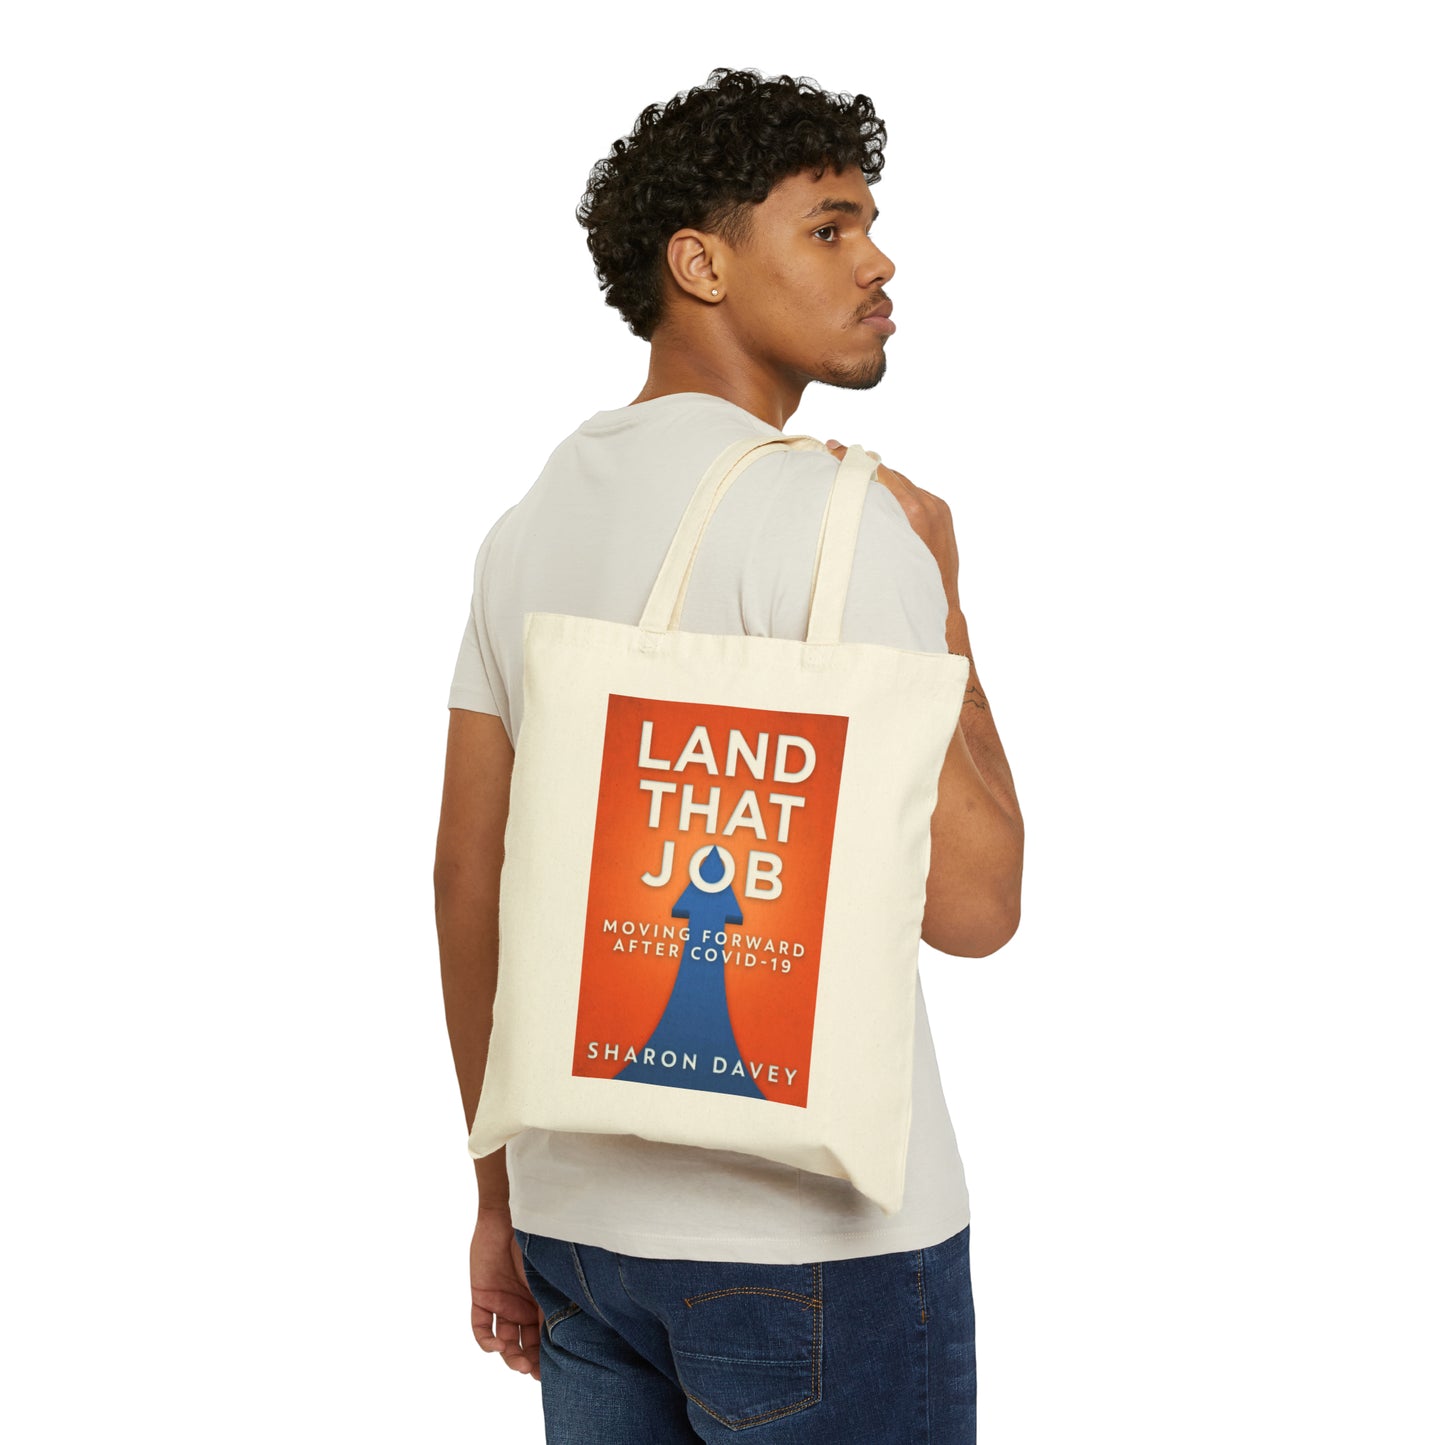 Land That Job - Moving Forward After Covid-19 - Cotton Canvas Tote Bag